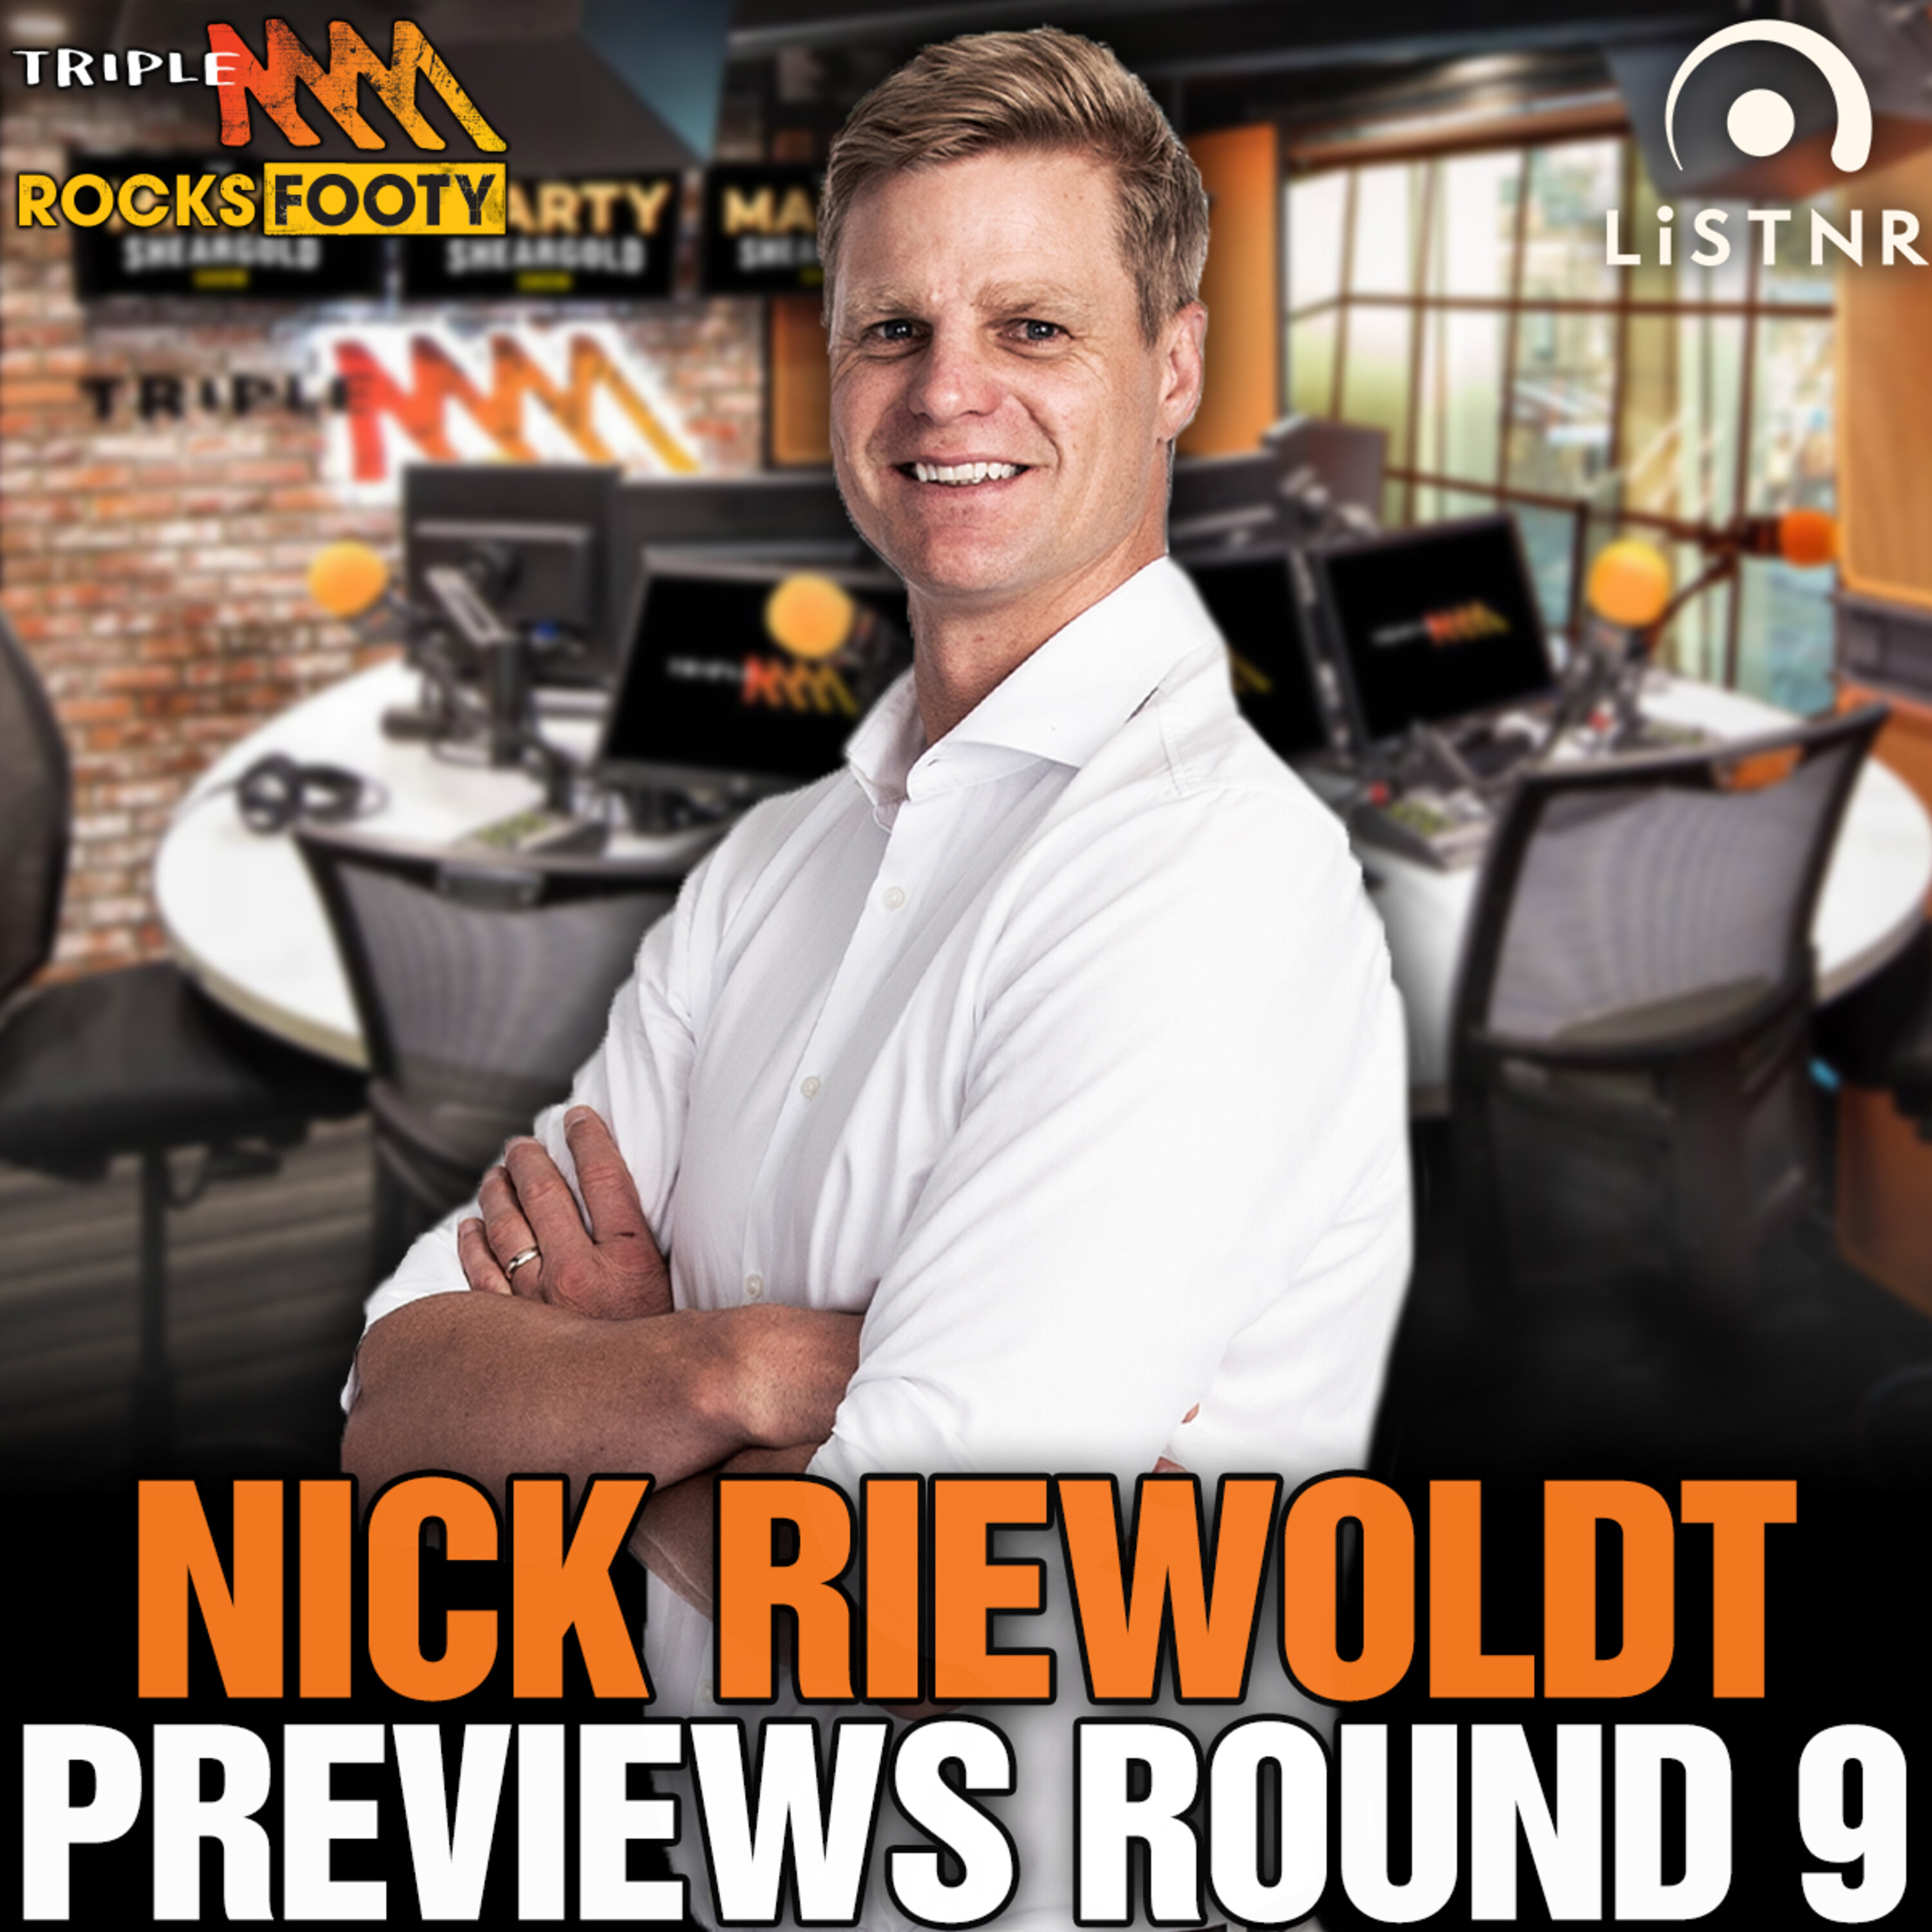 Nick Riewoldt on Leon Cameron stepping down at GWS, Alastair Clarkson’s future, and a preview of round 9